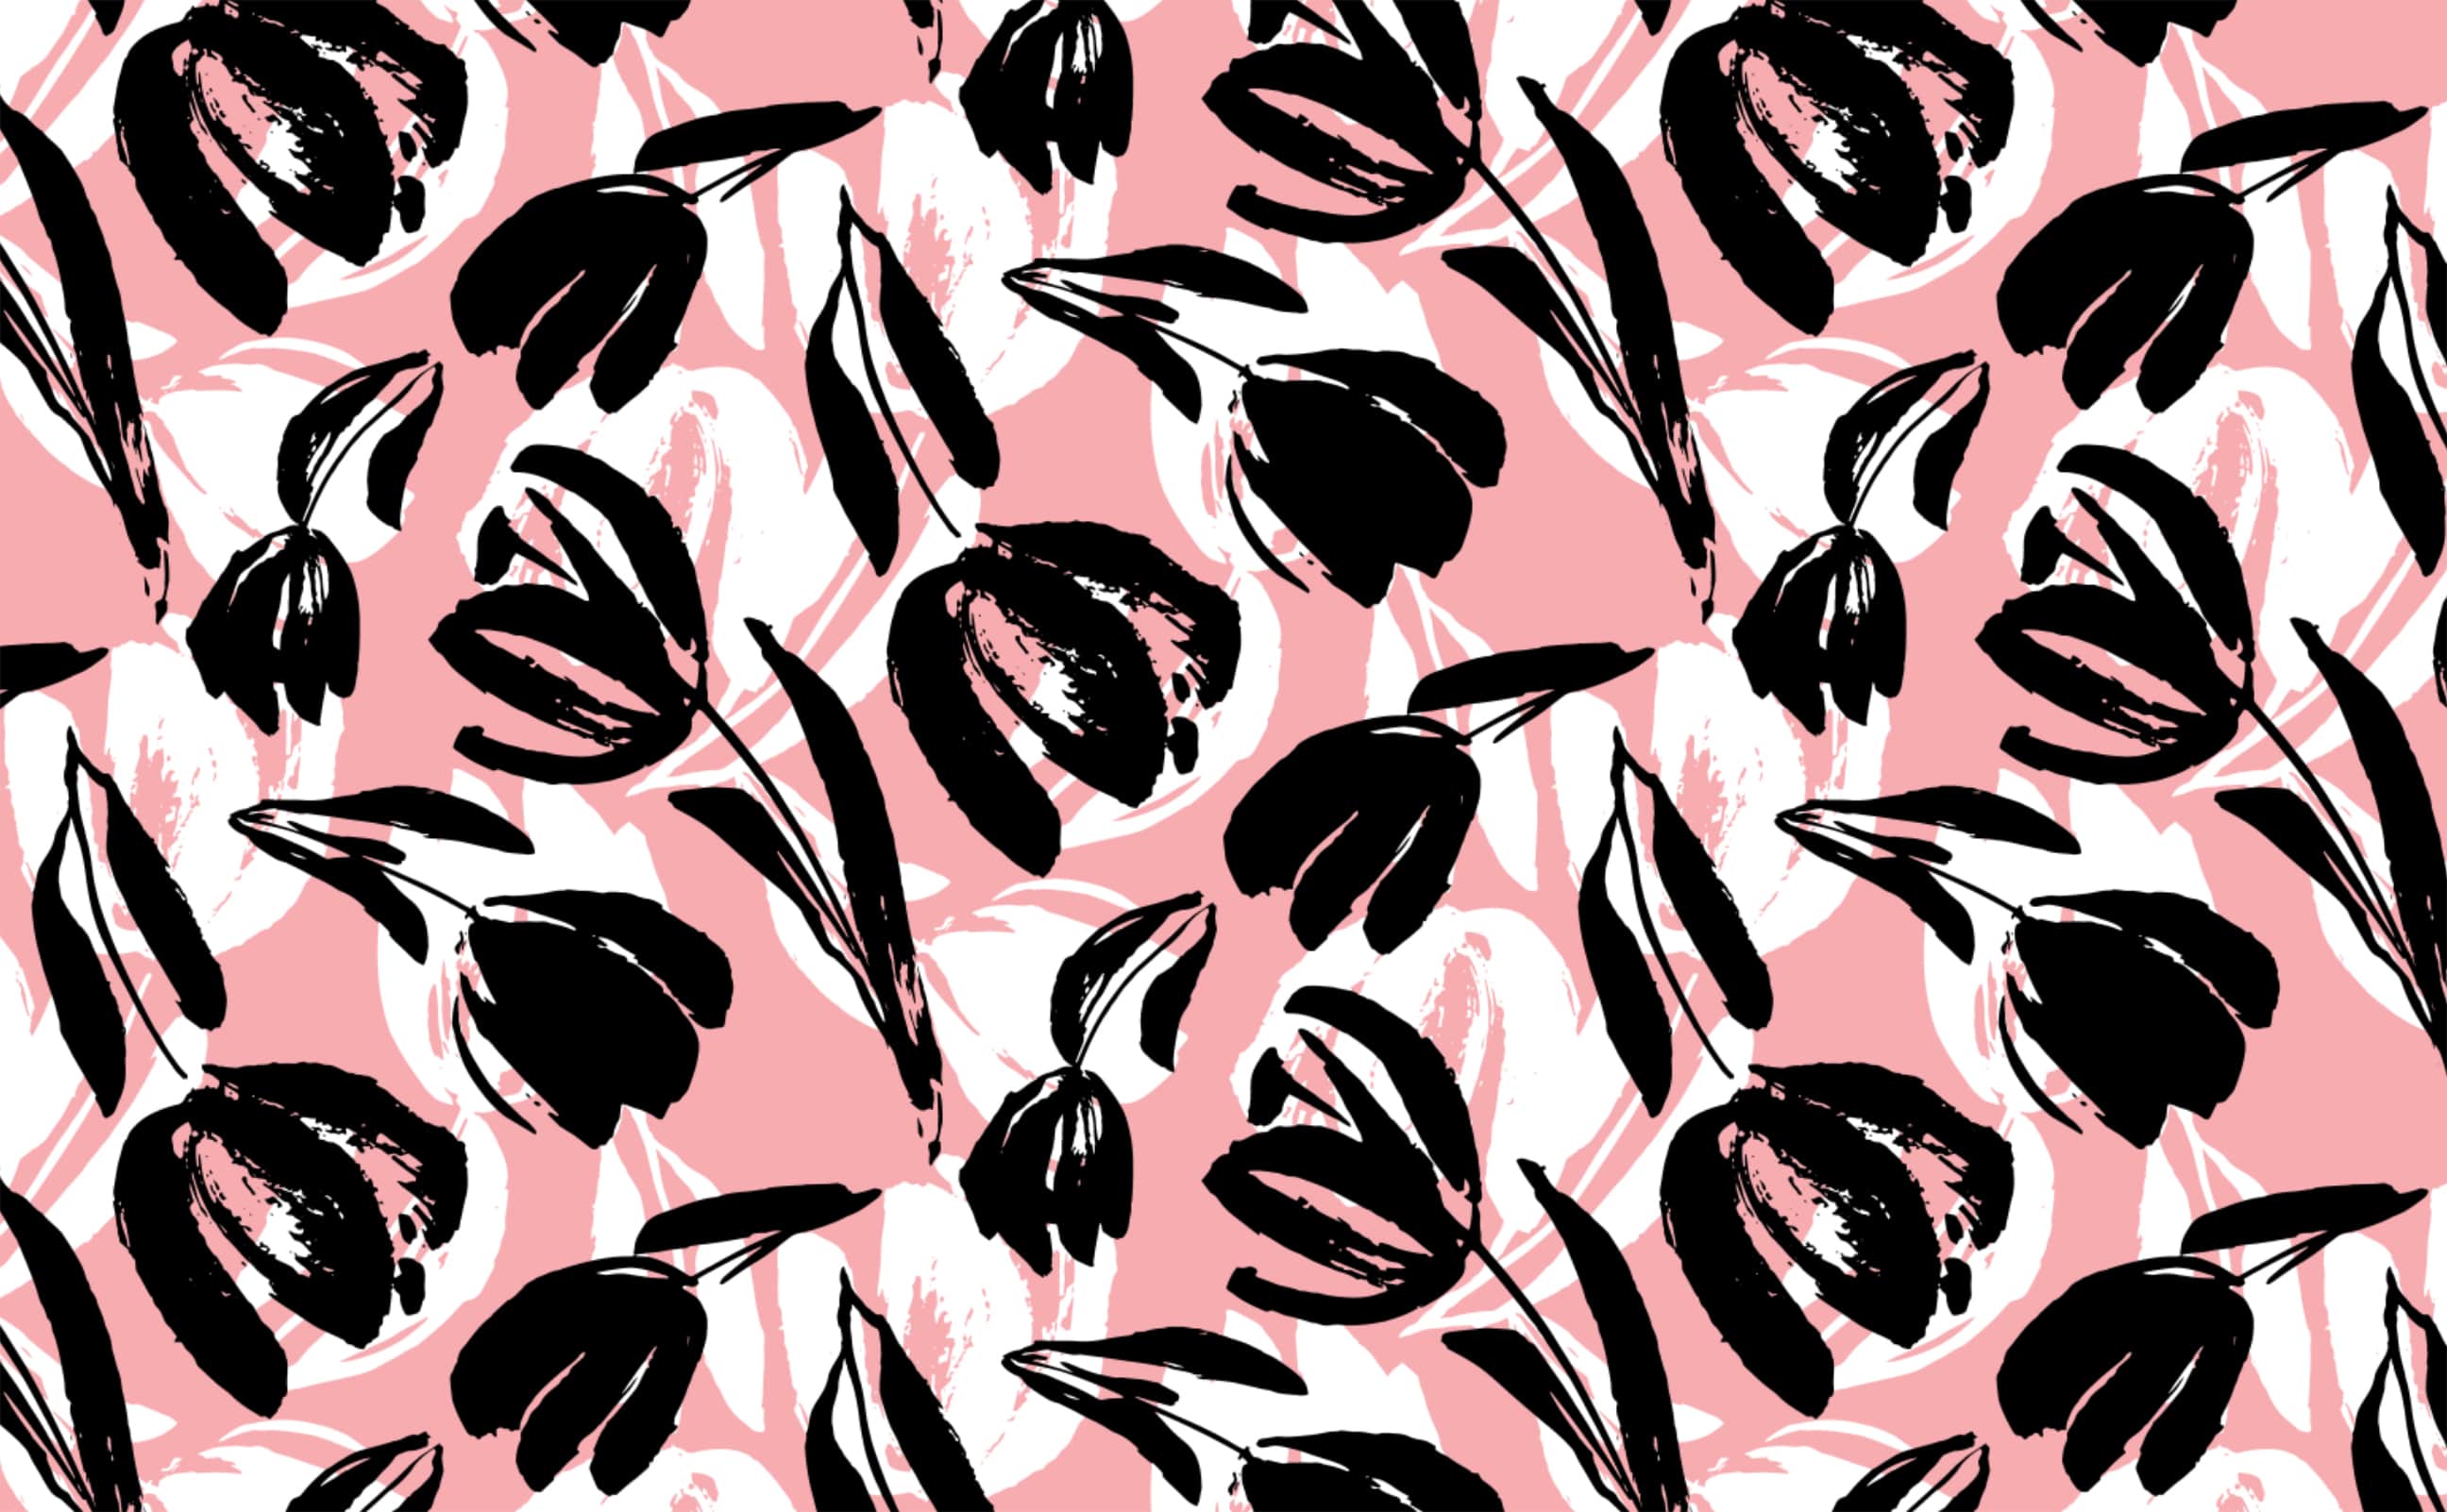 A black and white floral pattern - Pattern, tulip